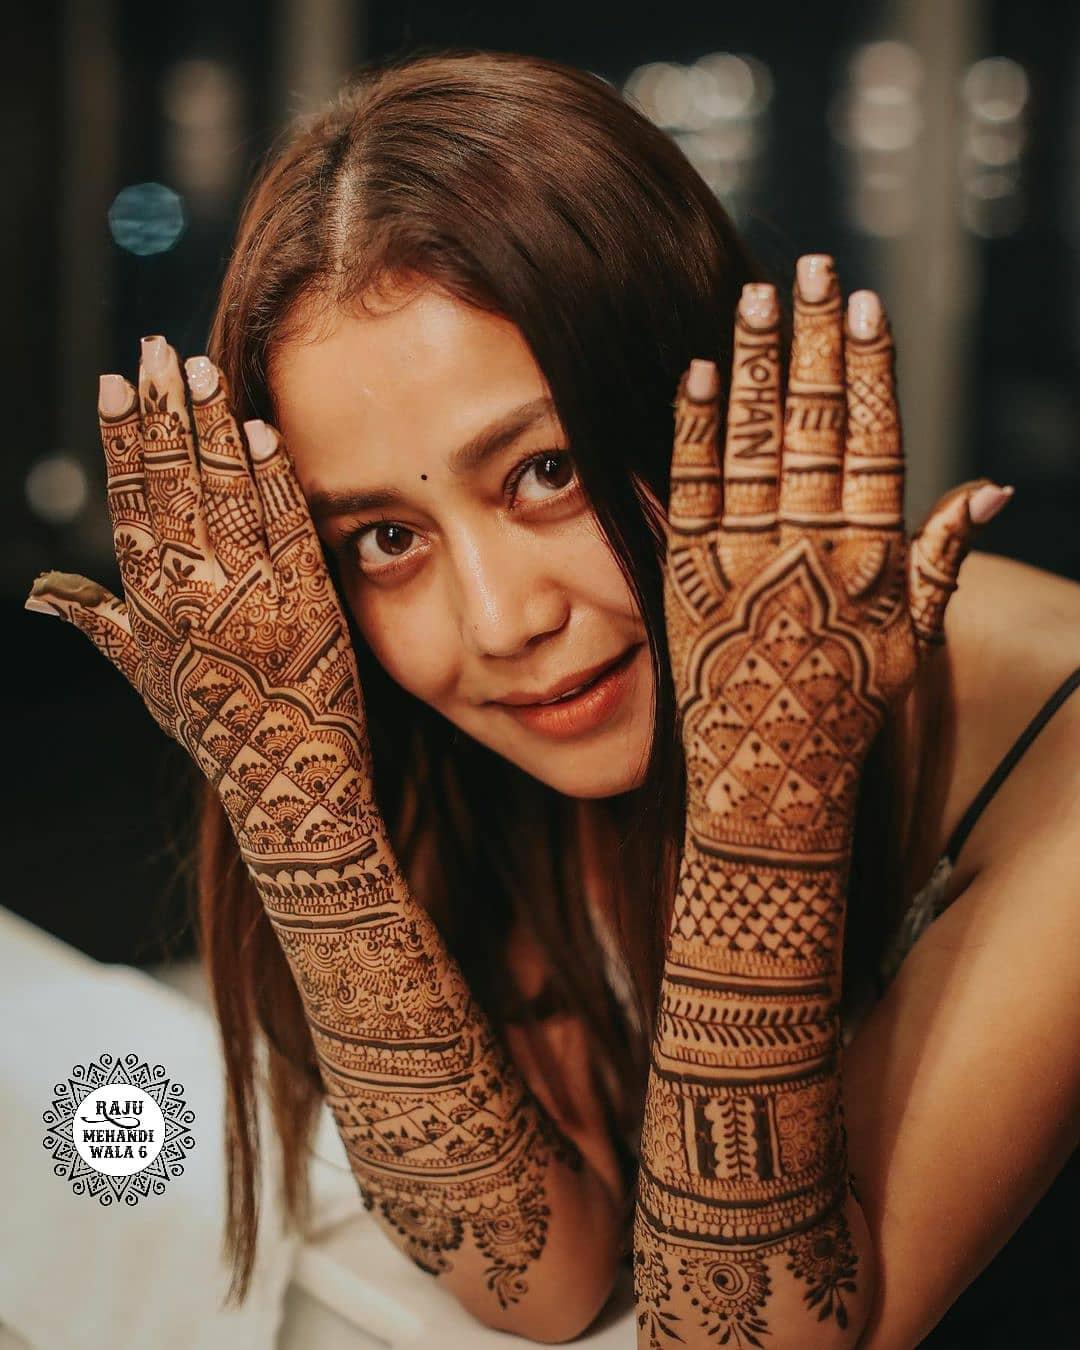 Latest Bridal Mehandi Designs 2021: Front and Back Hands